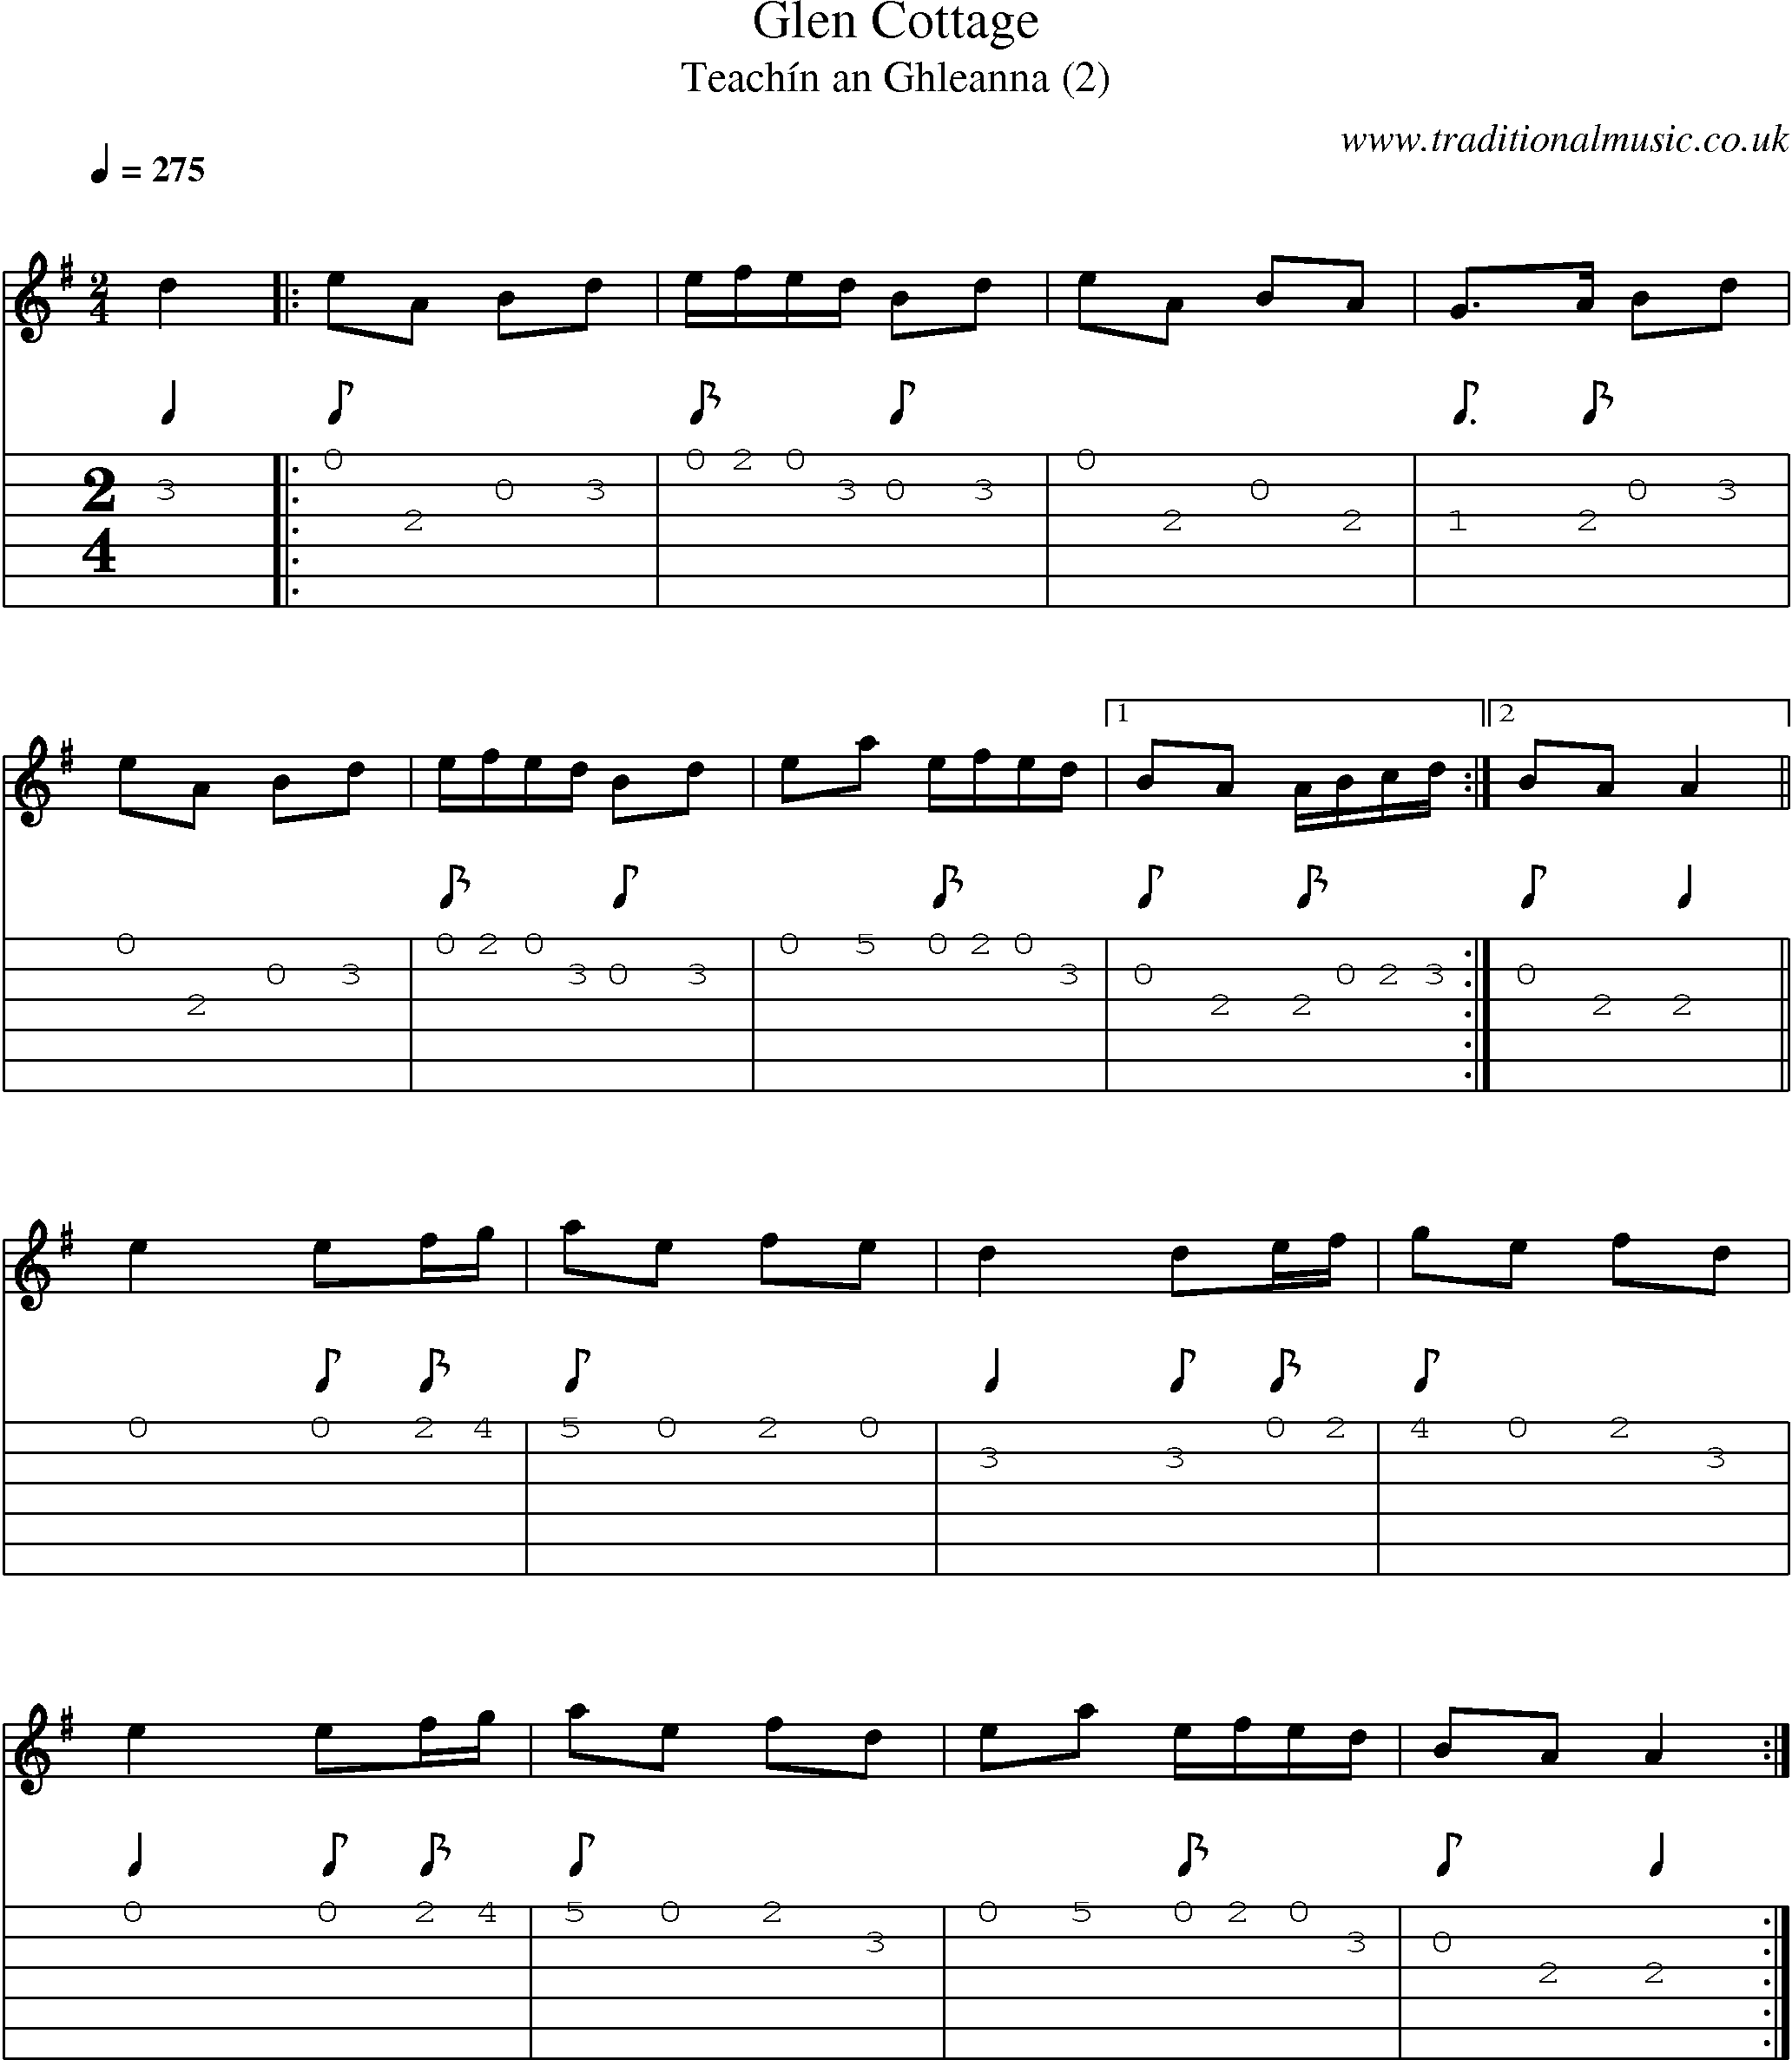 Music Score and Guitar Tabs for Glen Cottage